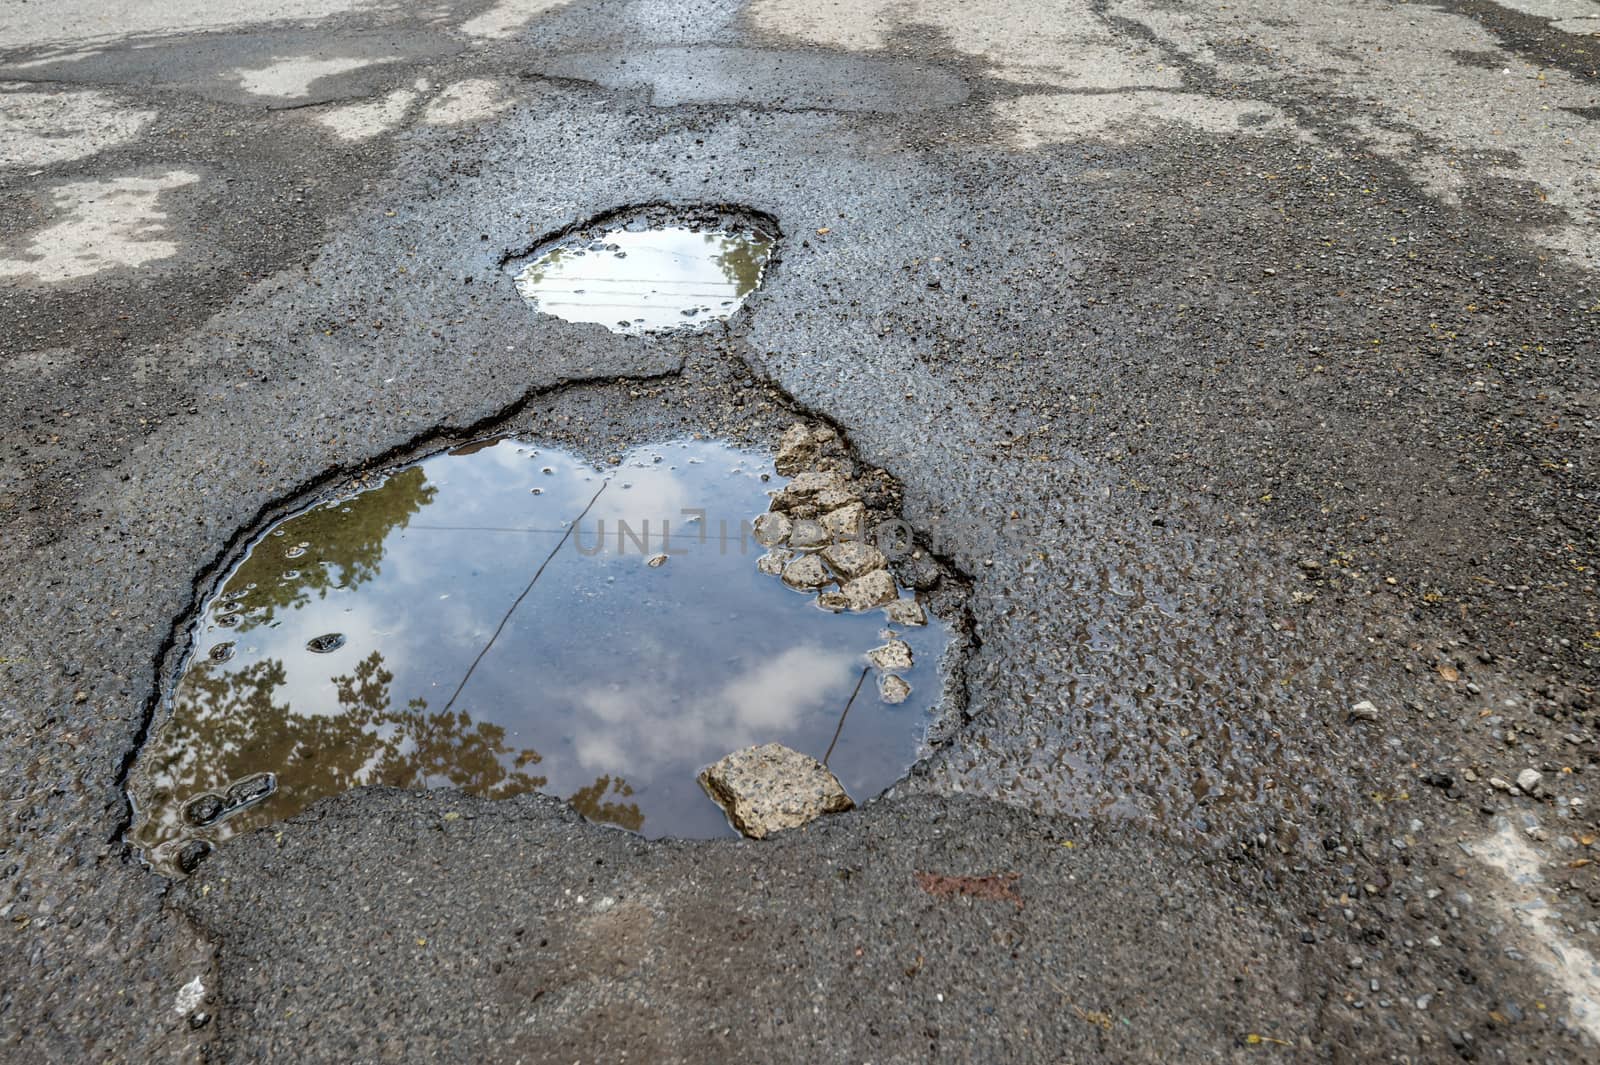 Large rounded pothole filled with water in Montreal